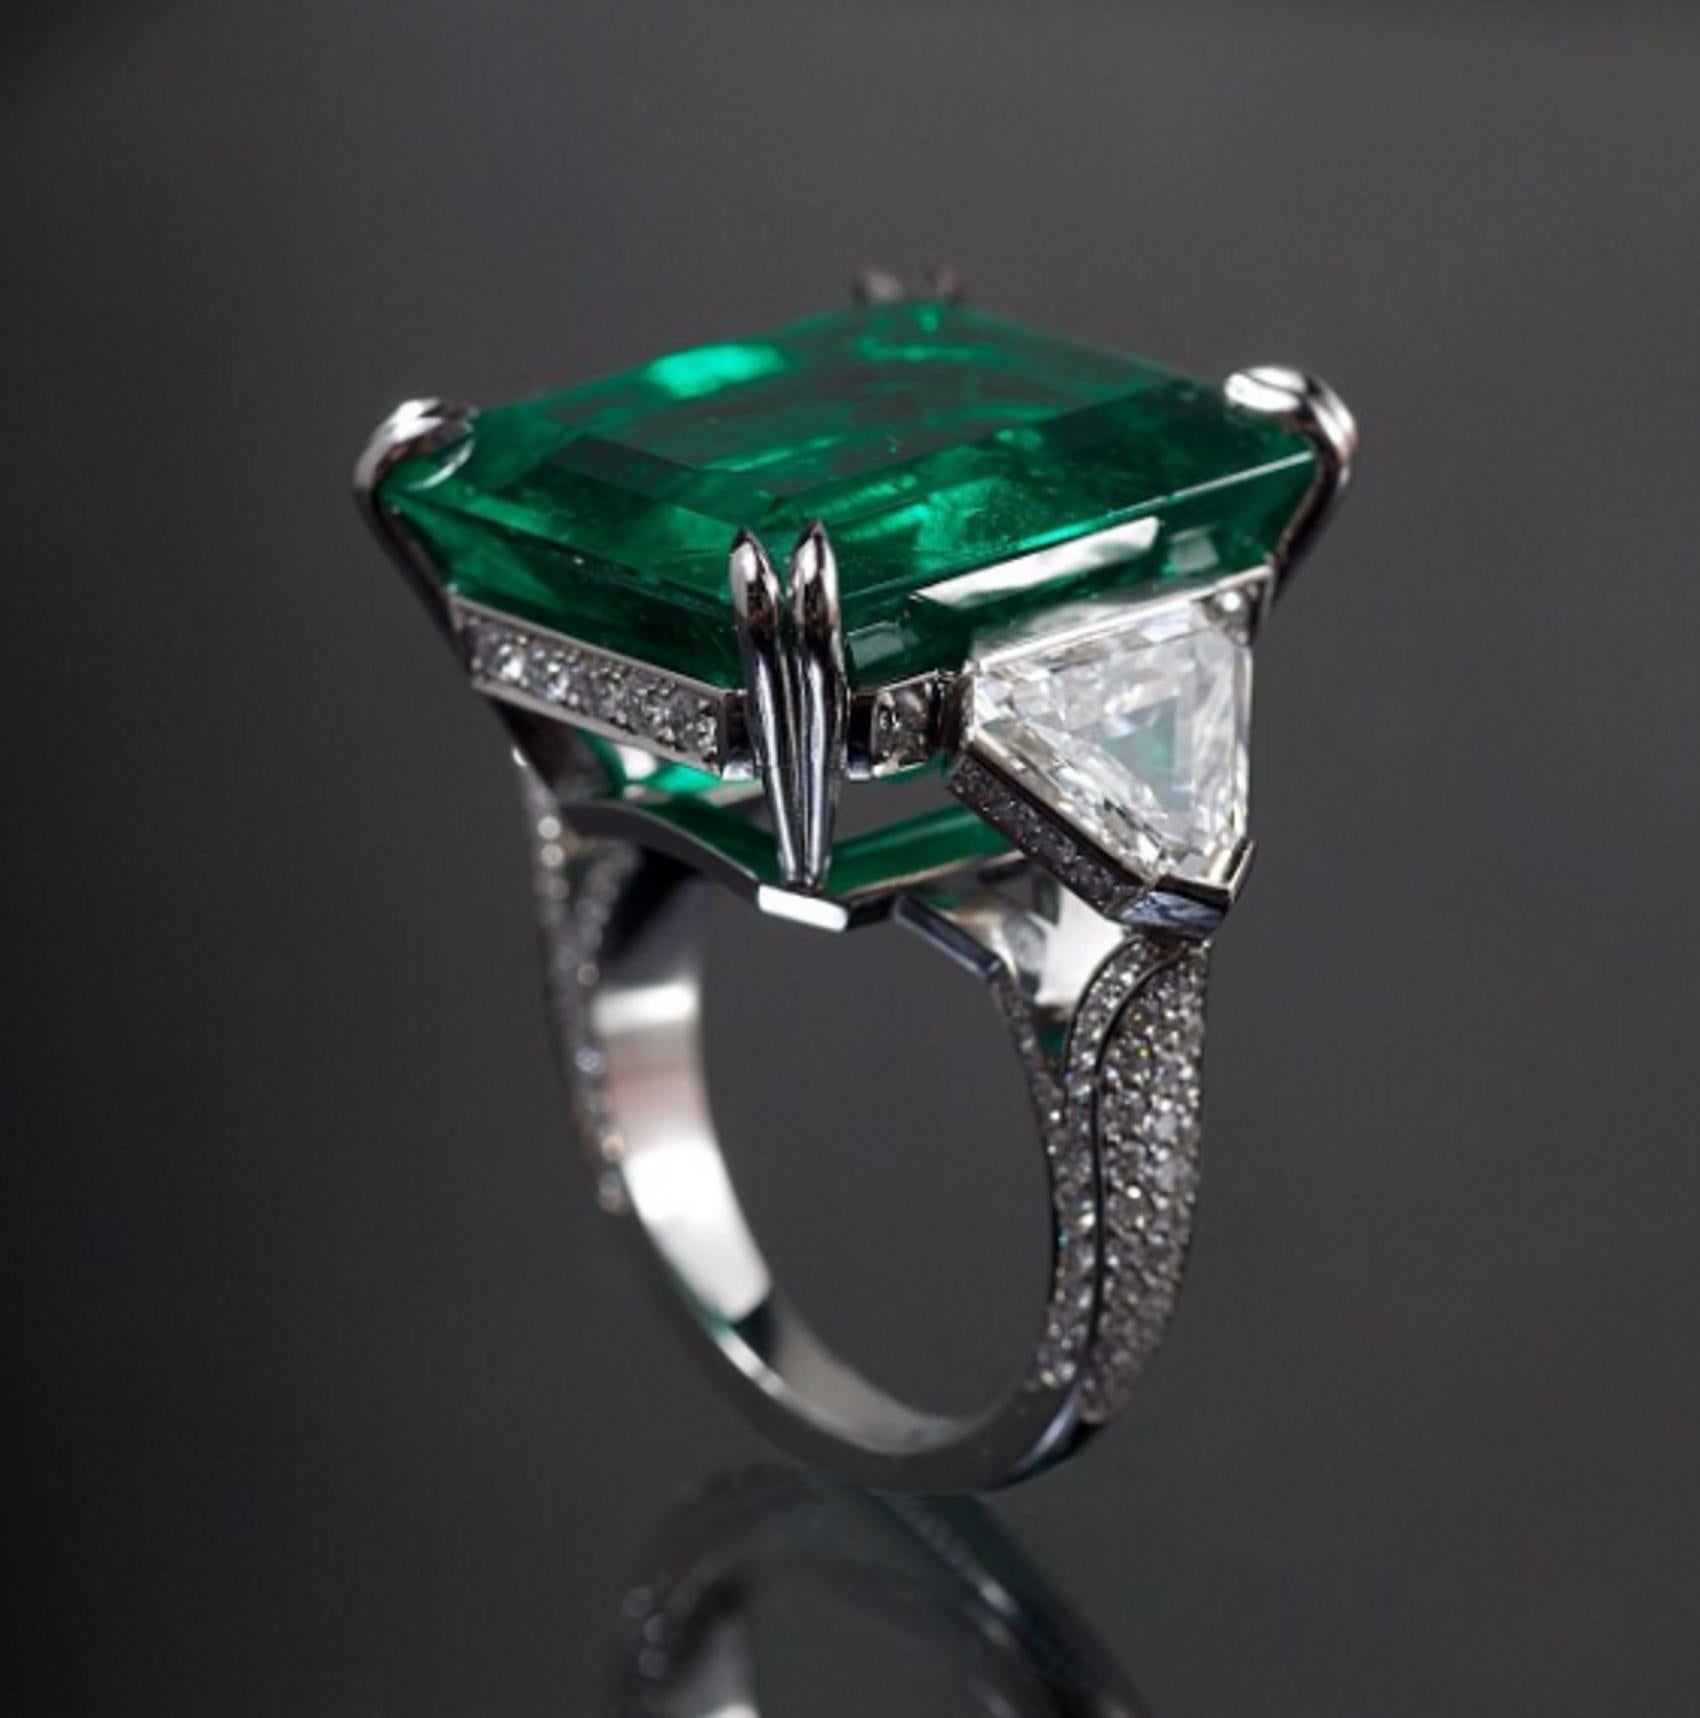 Octagonal GRS Vivid Green Emerald Ring:

Elevate your style with the timeless elegance of our Octagonal GRS Vivid Green Emerald Ring. This exquisite piece features a stunning 9.70 carat emerald, certified by the renowned Gem Research Swisslab (GRS)